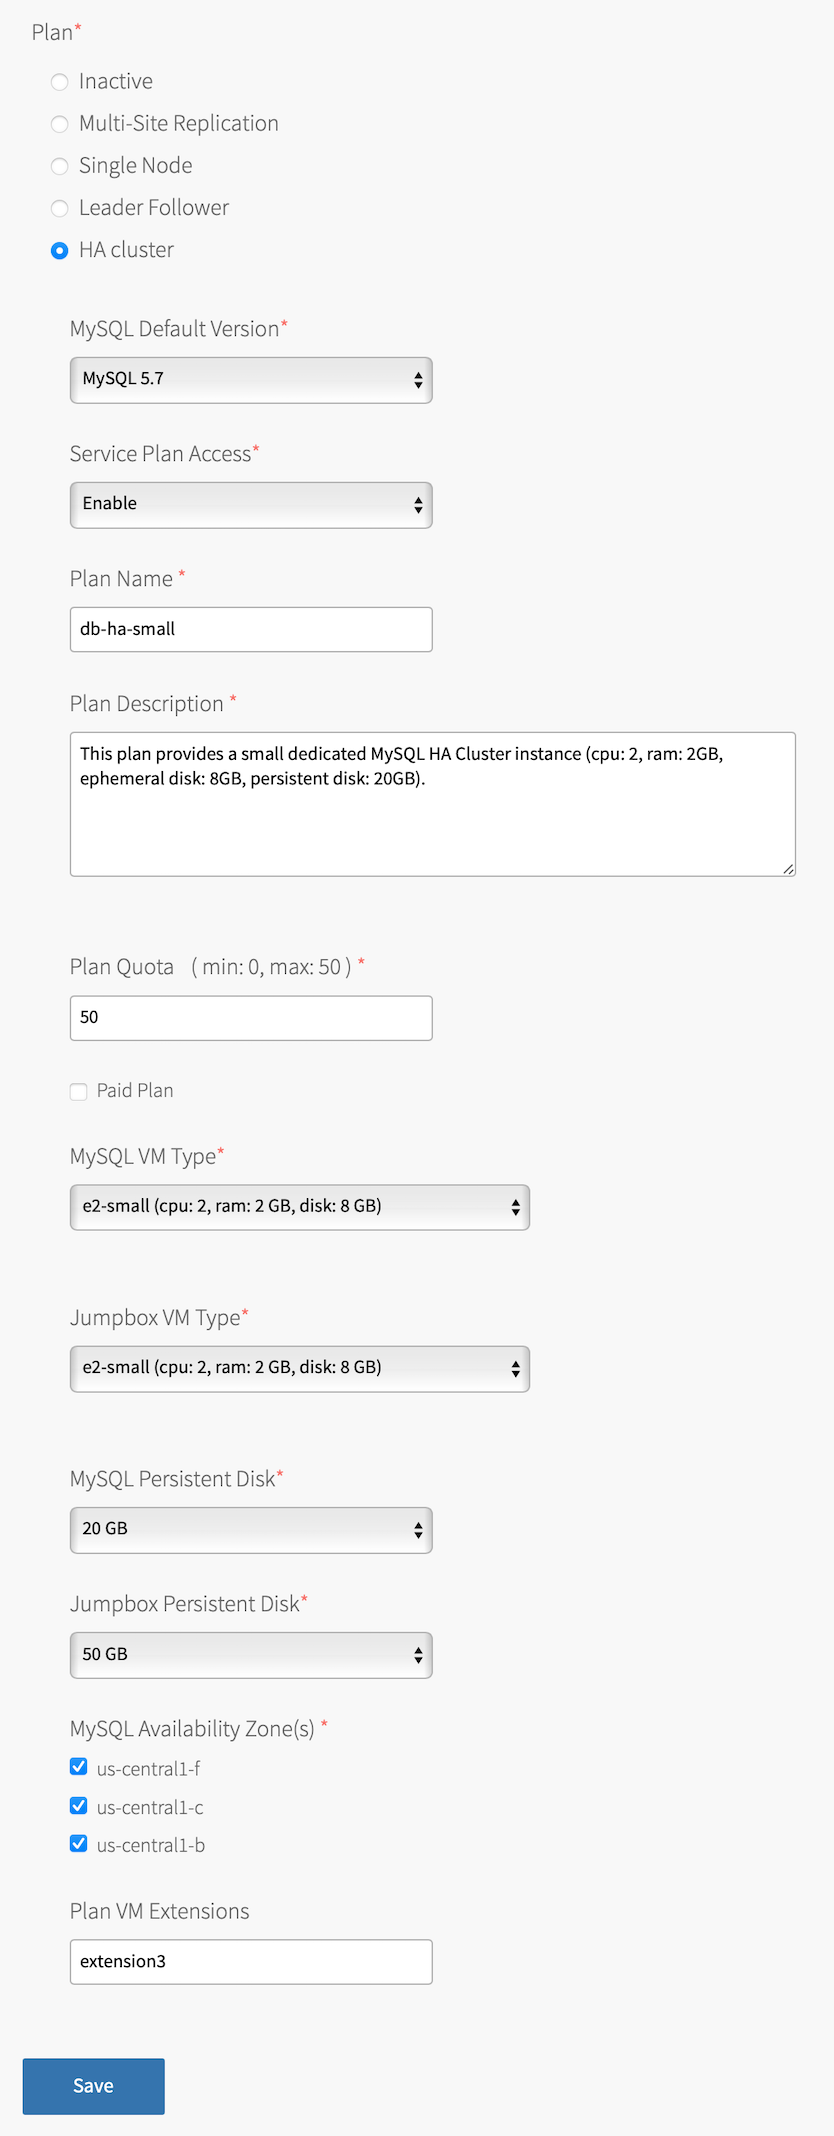 The 'Plan' section is shown and the radio button next to 'HA cluster' is selected. The table in the next step describes the fields that are revealed after selecting this plan.